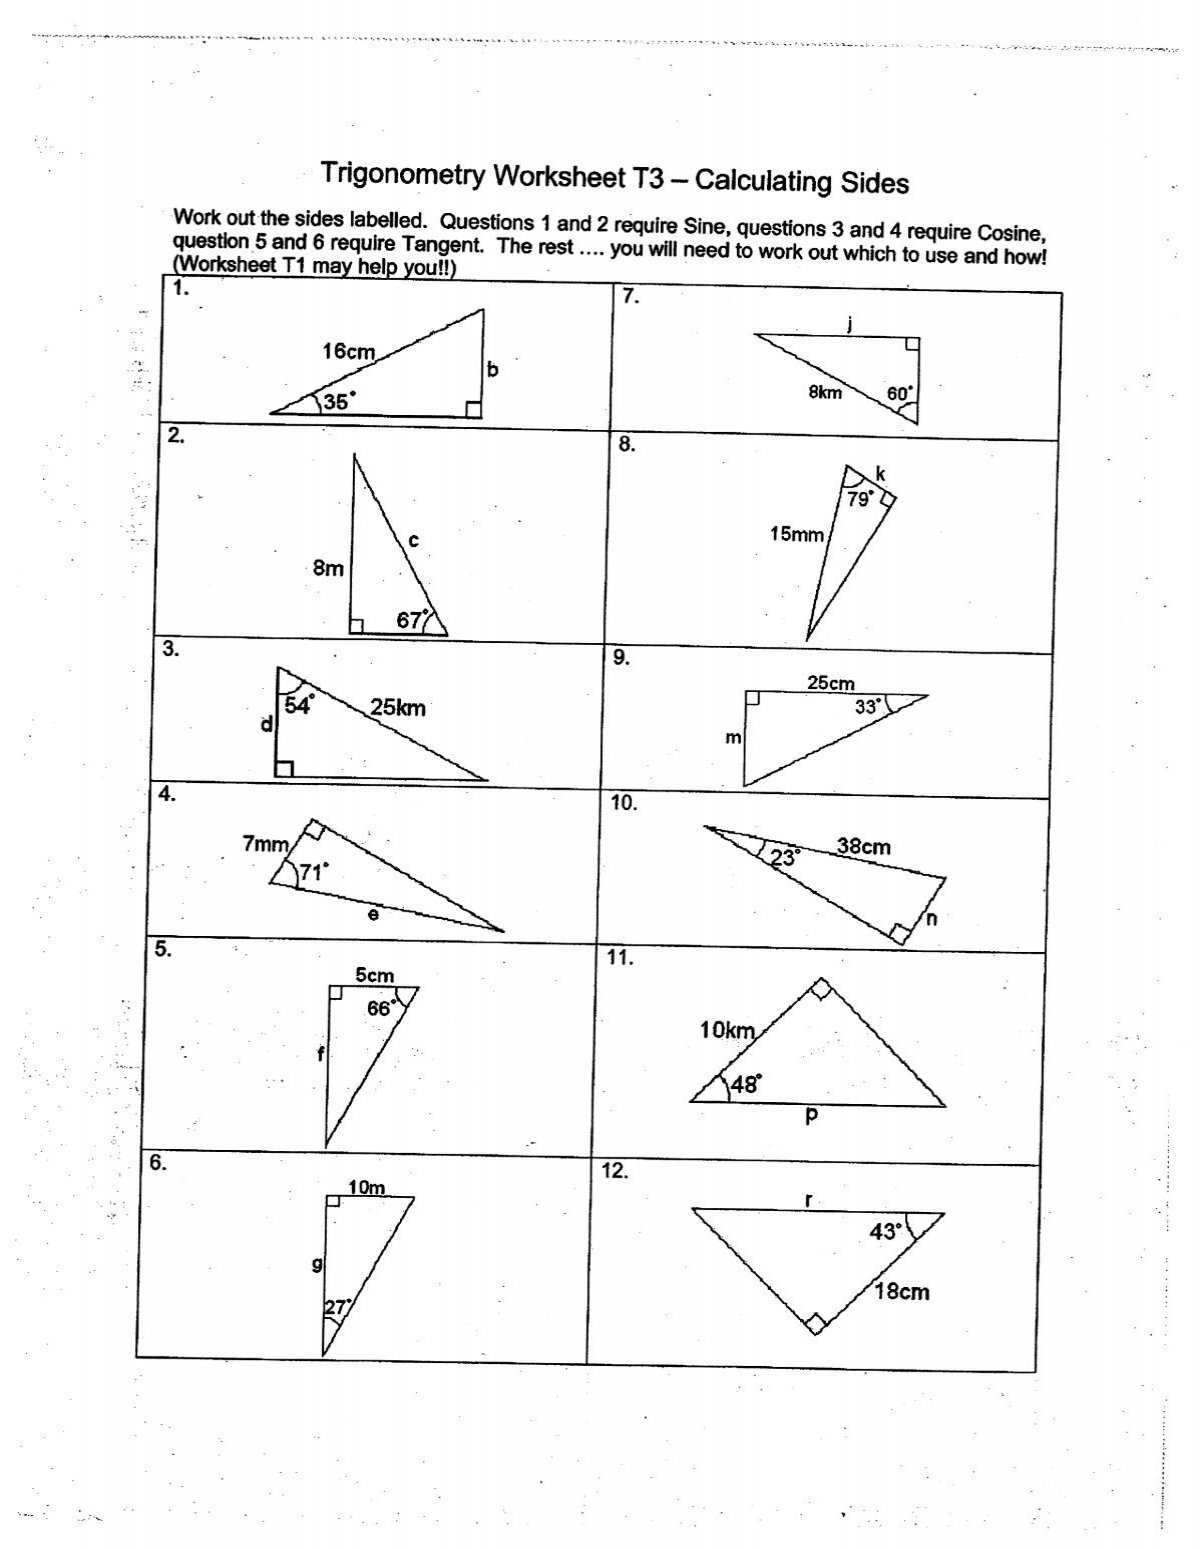 trigonometry-worksheet-t3-calculating-sides-answers